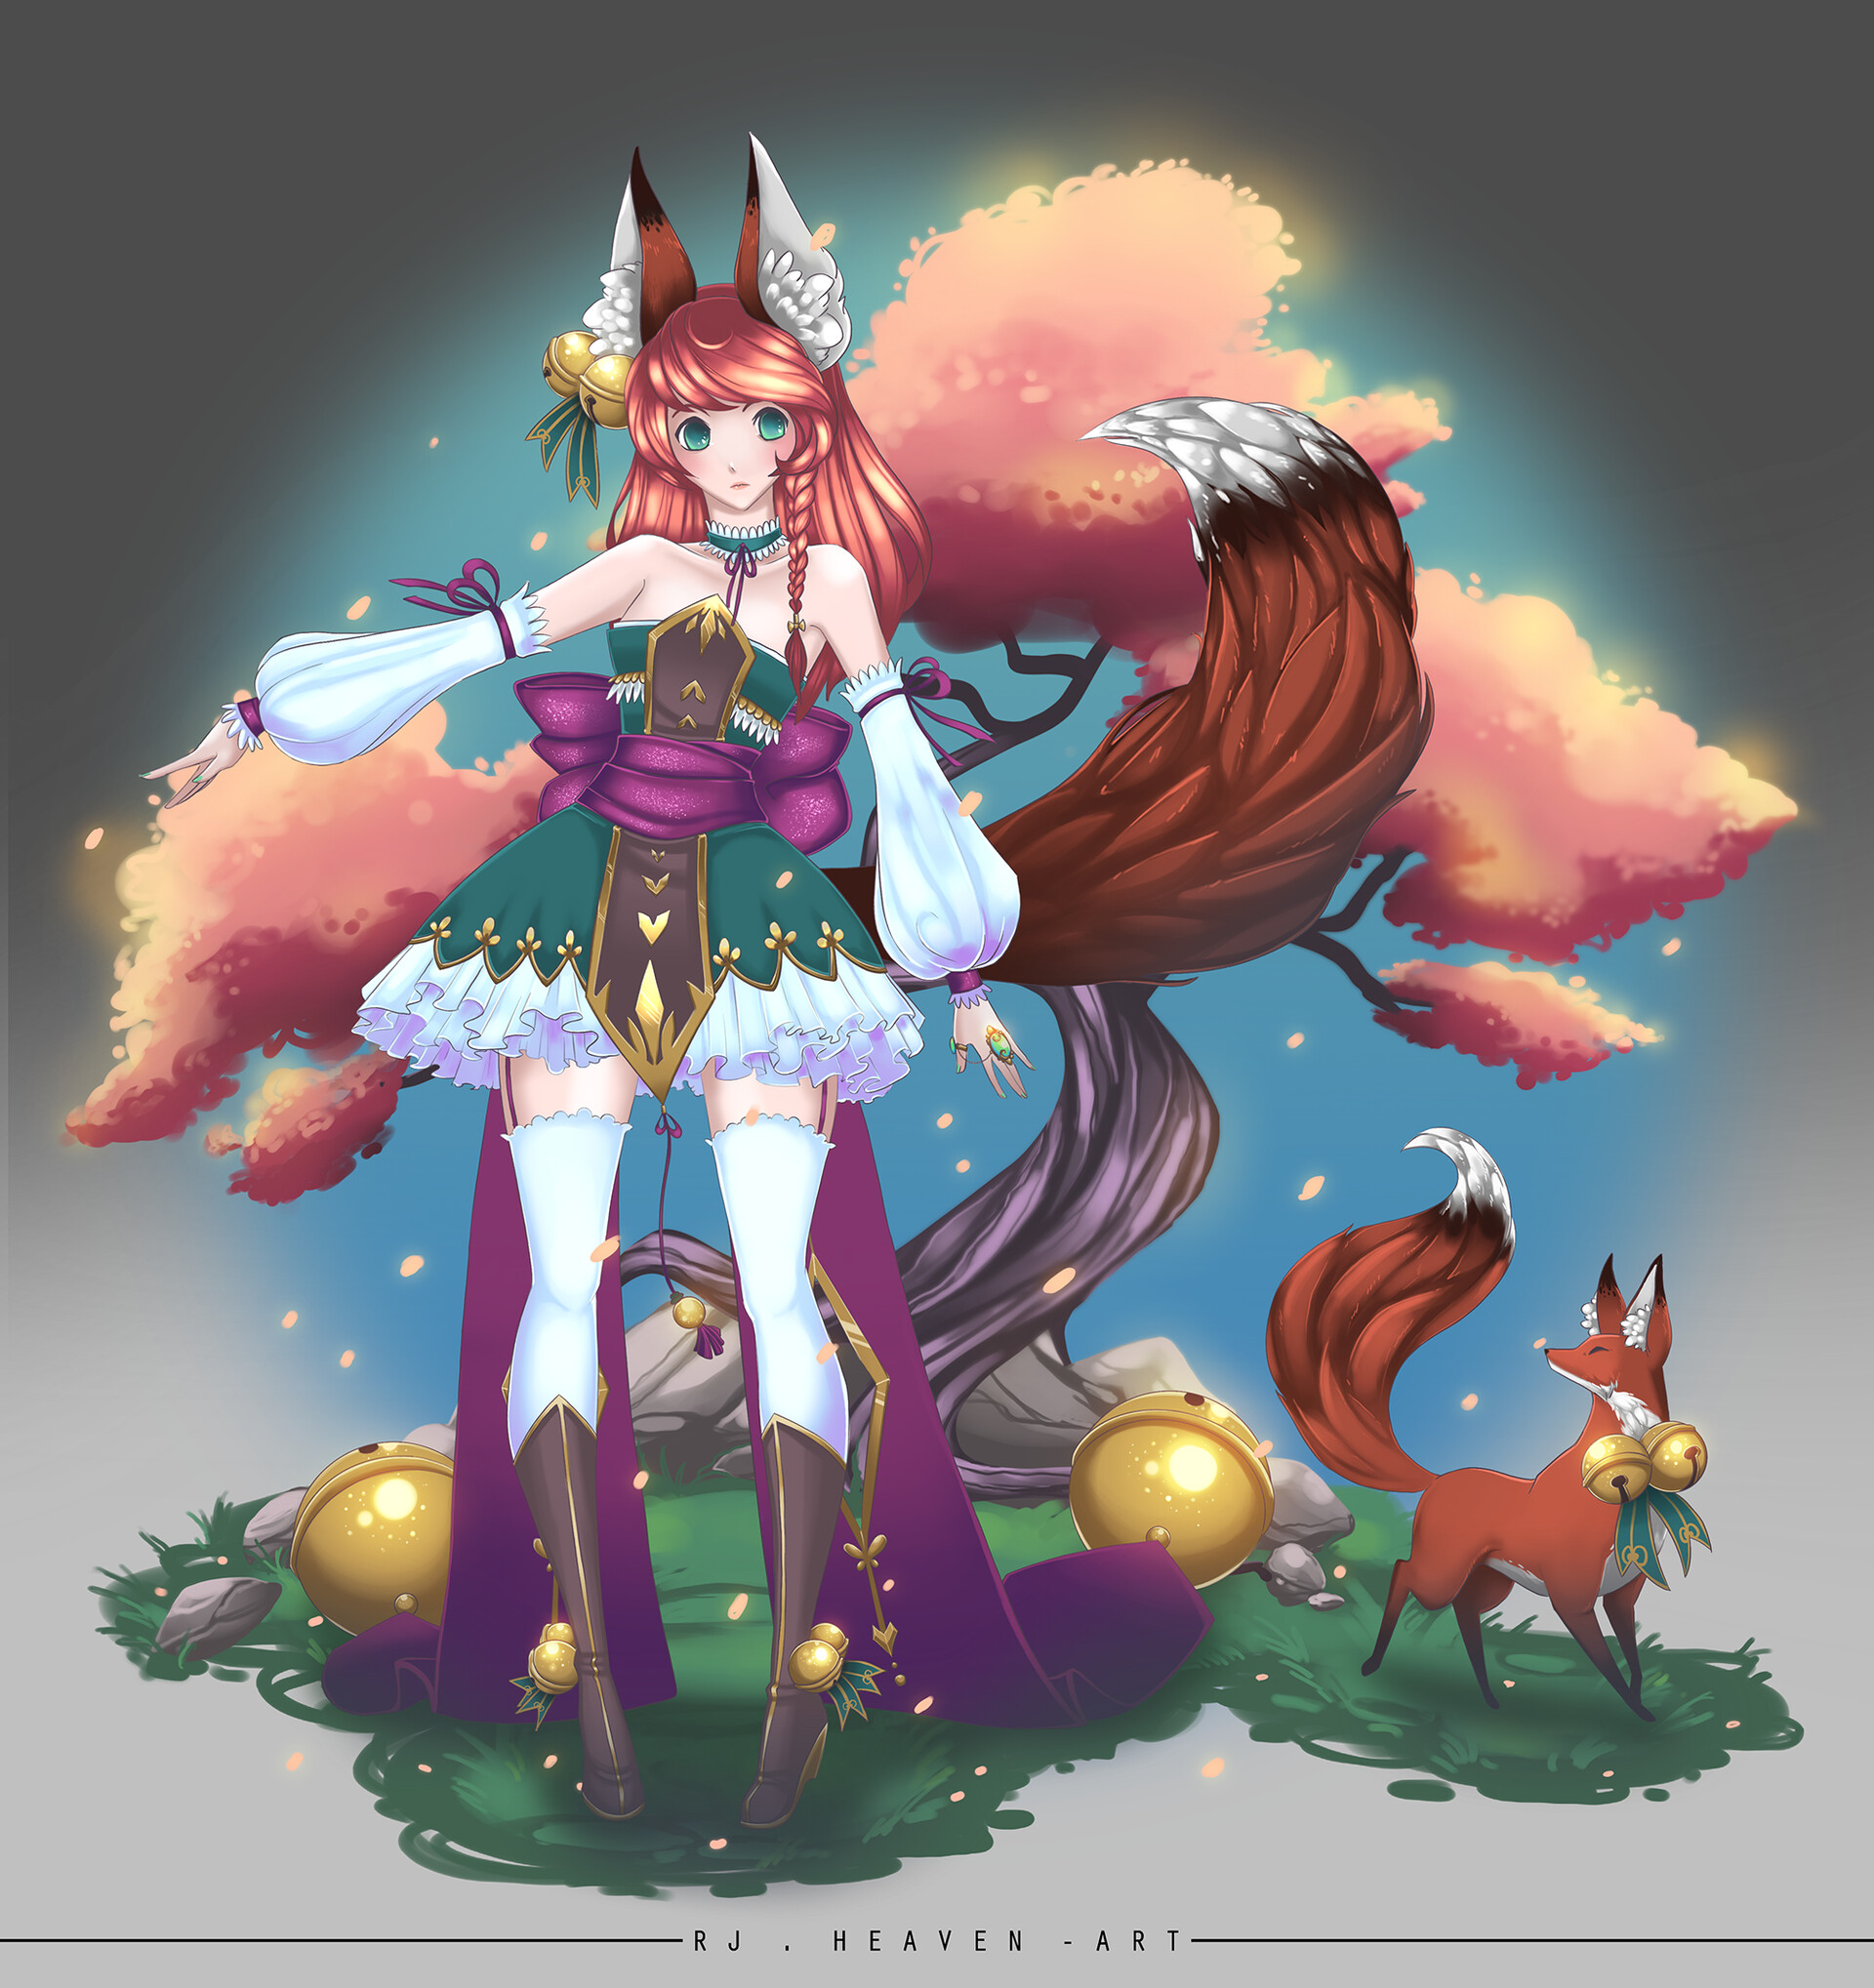 Nine Tailed Fox White Transparent Cartoon Character Game Fox Nine Tailed  Fox Q Version Of The Fox Anime Game Mobile Game PNG Image For Free  Download